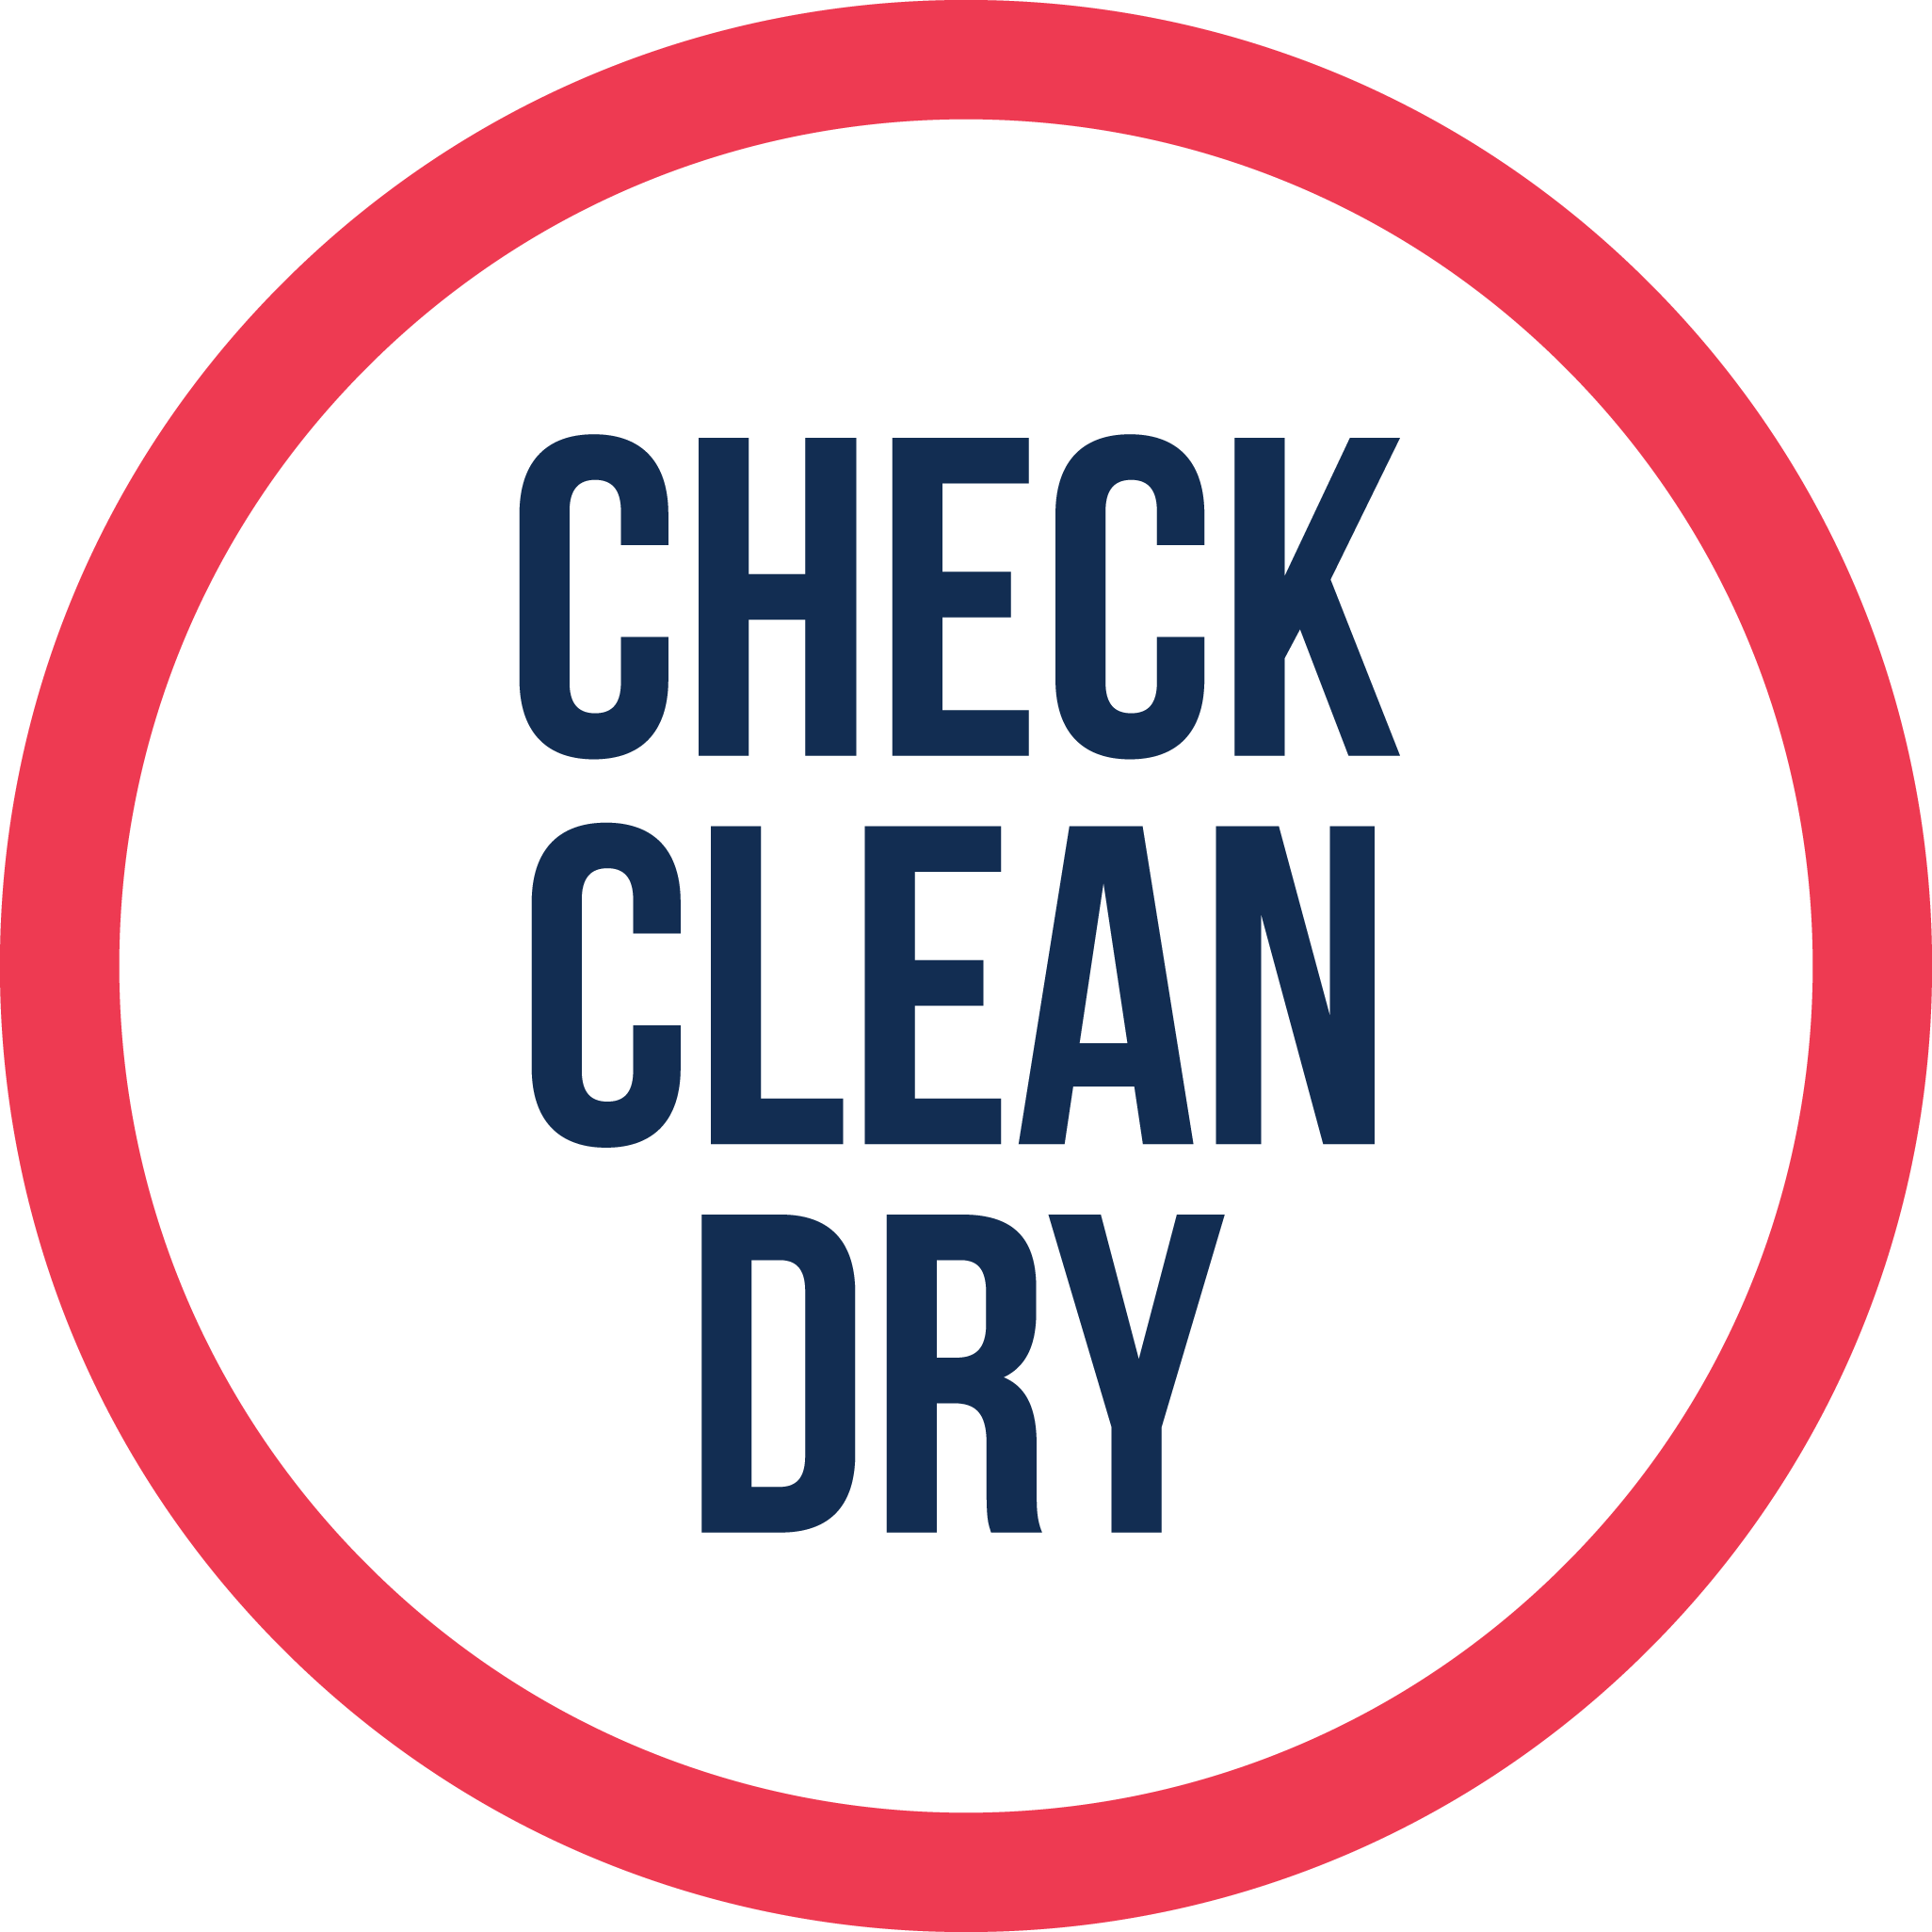 Check Clean Dry